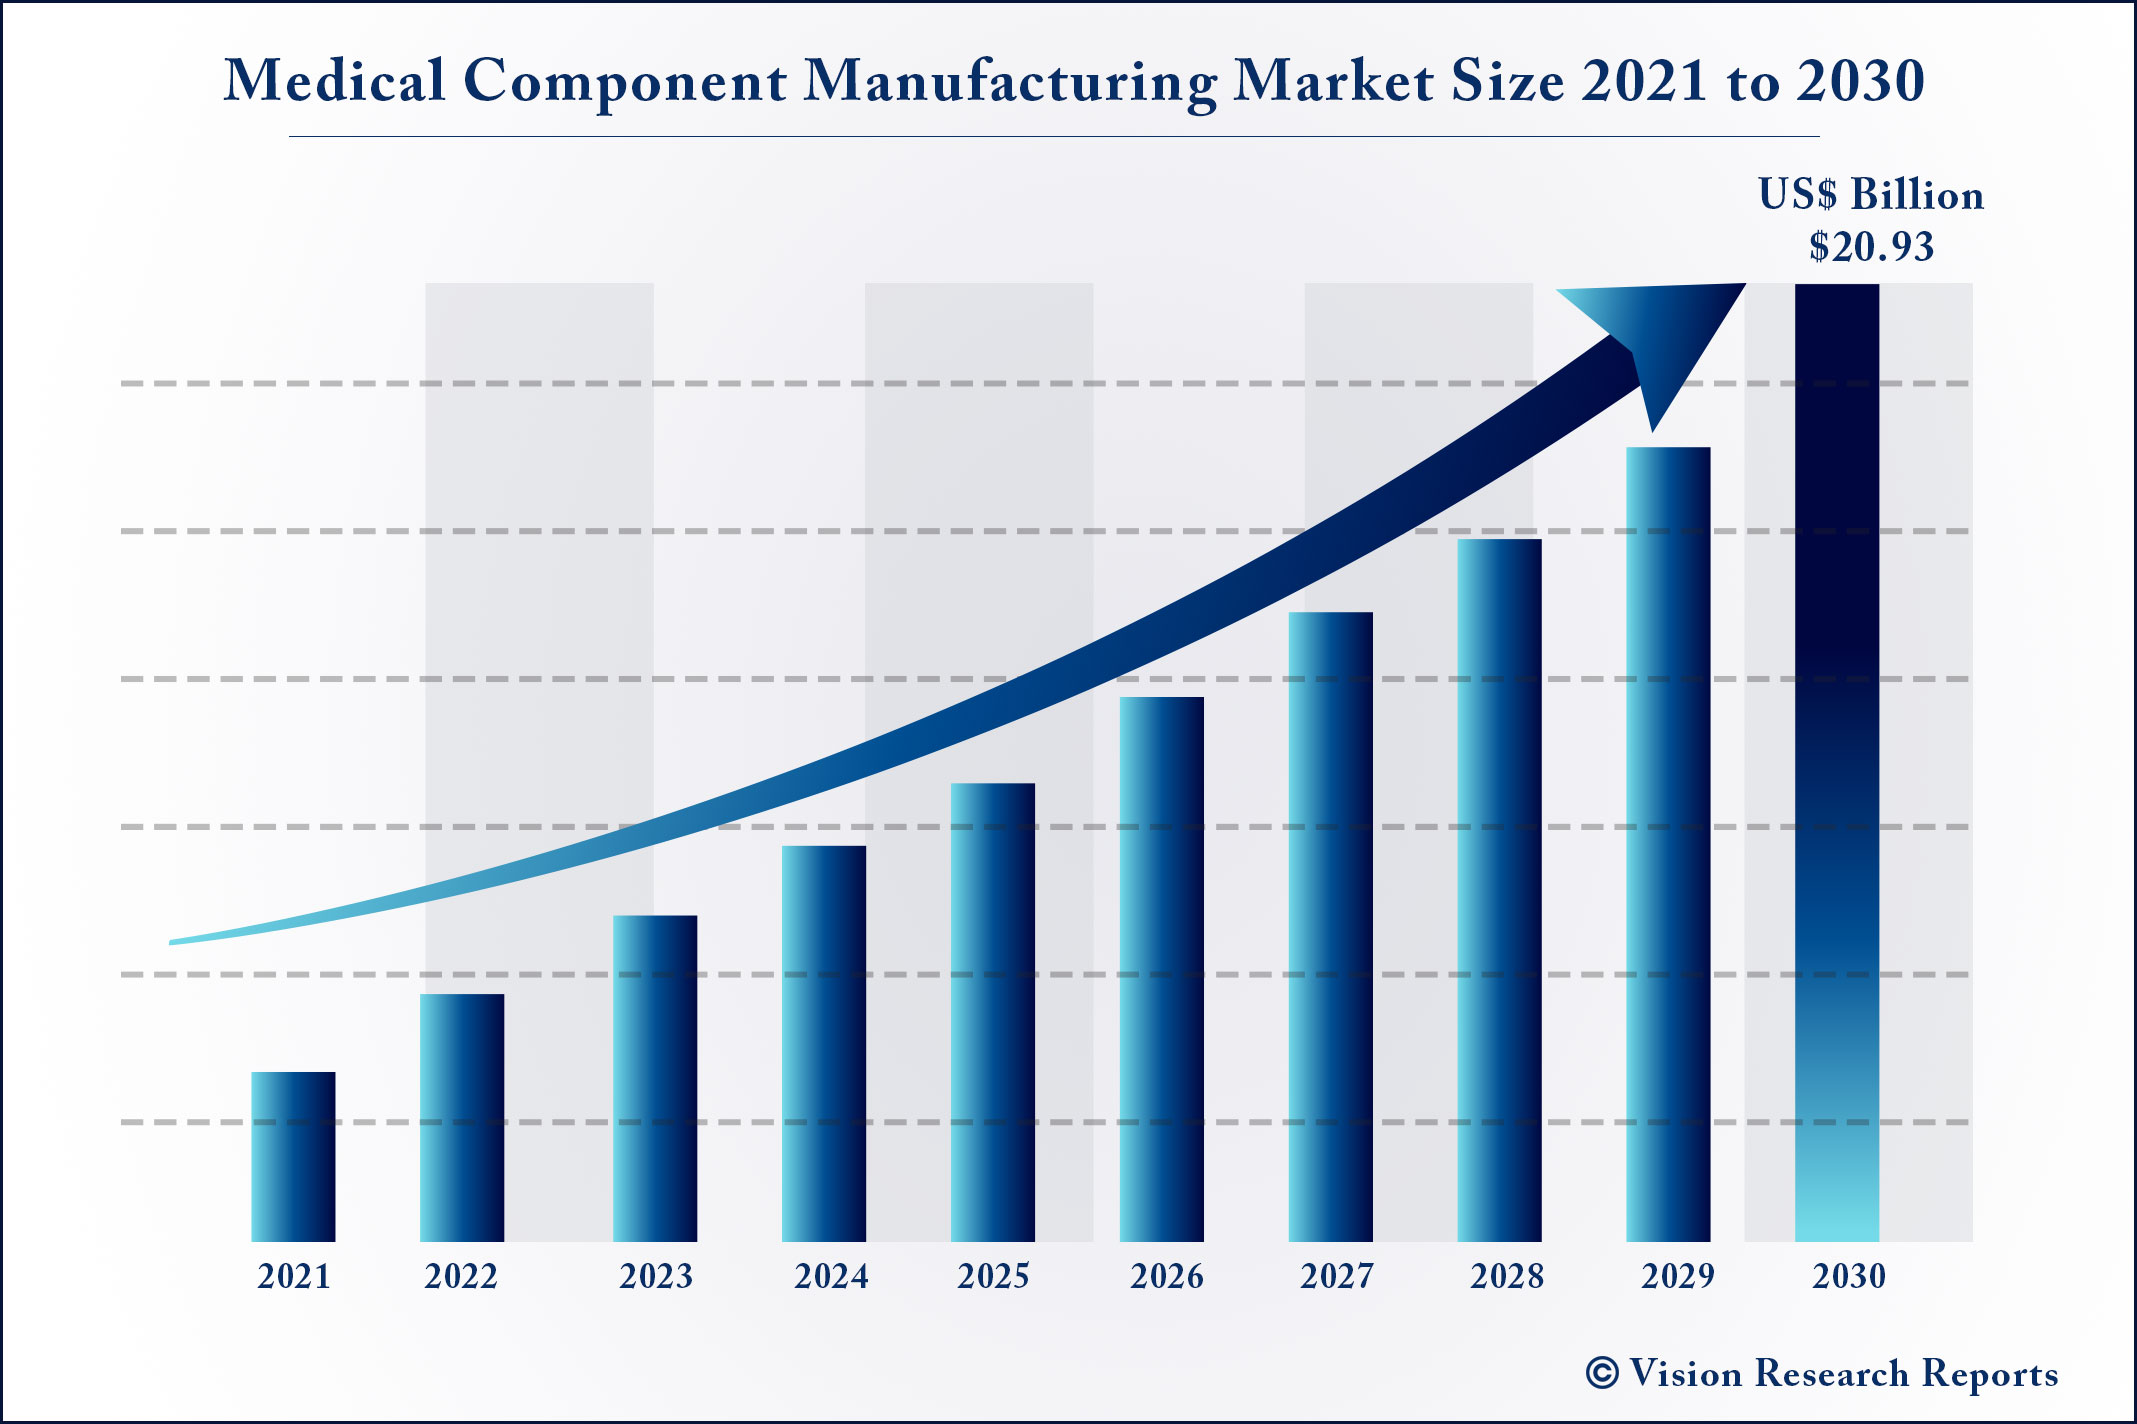 Medical Component Manufacturing Market Size 2021 to 2030